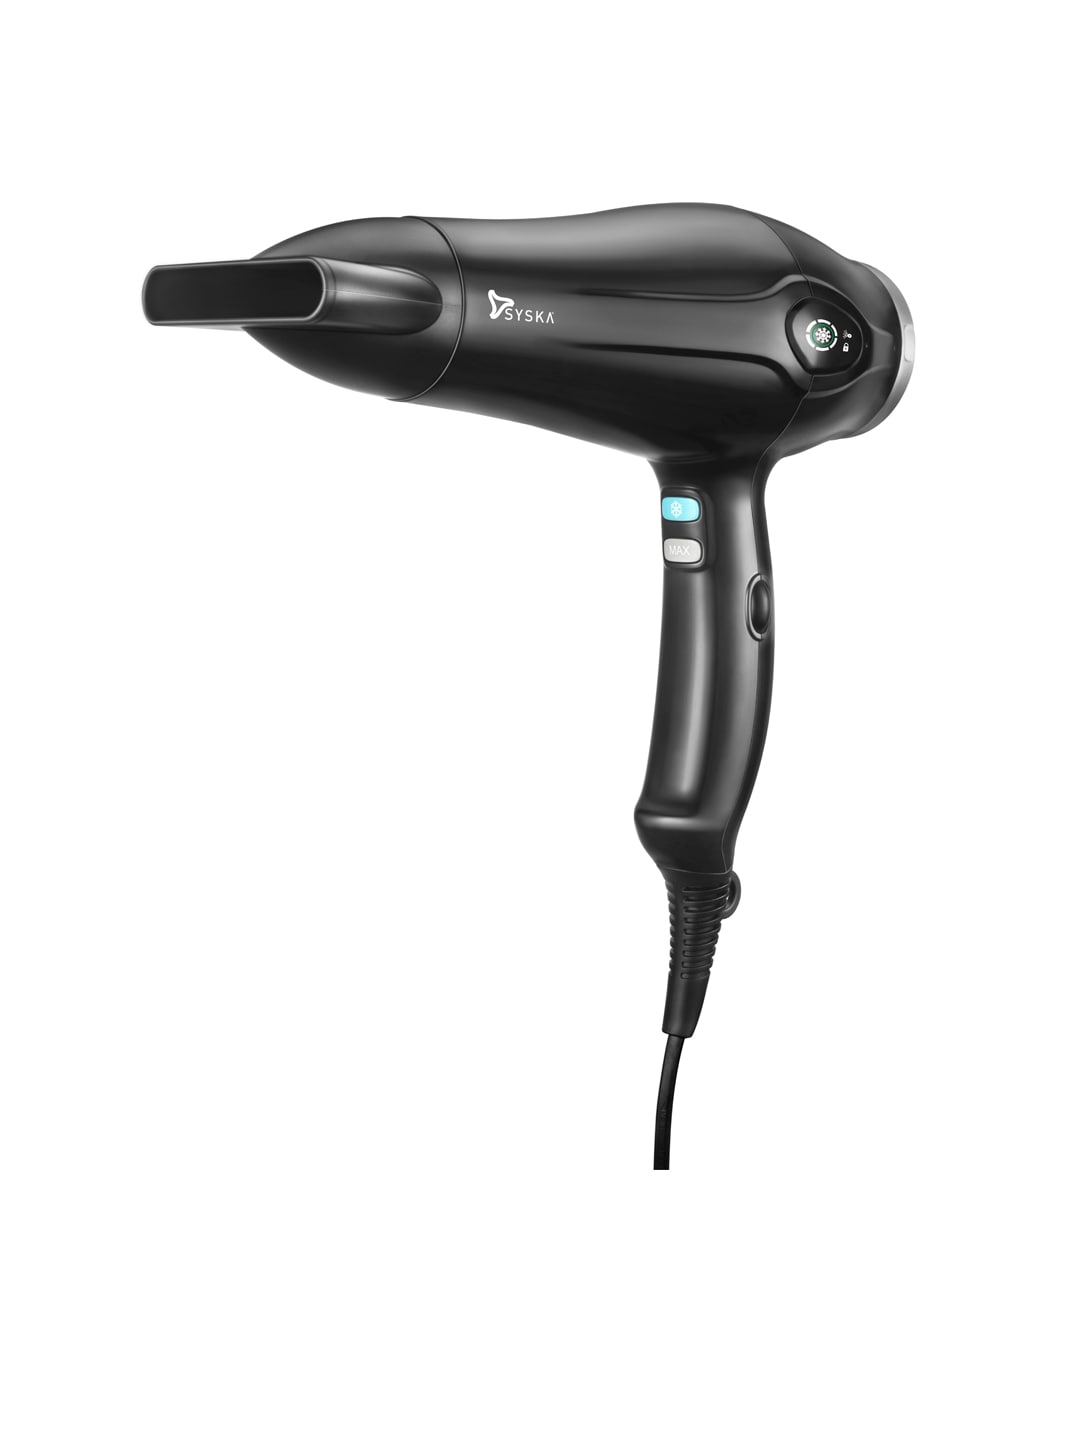 SYSKA Professional Series 2000W HDP1000 Hair Dryer Price in India